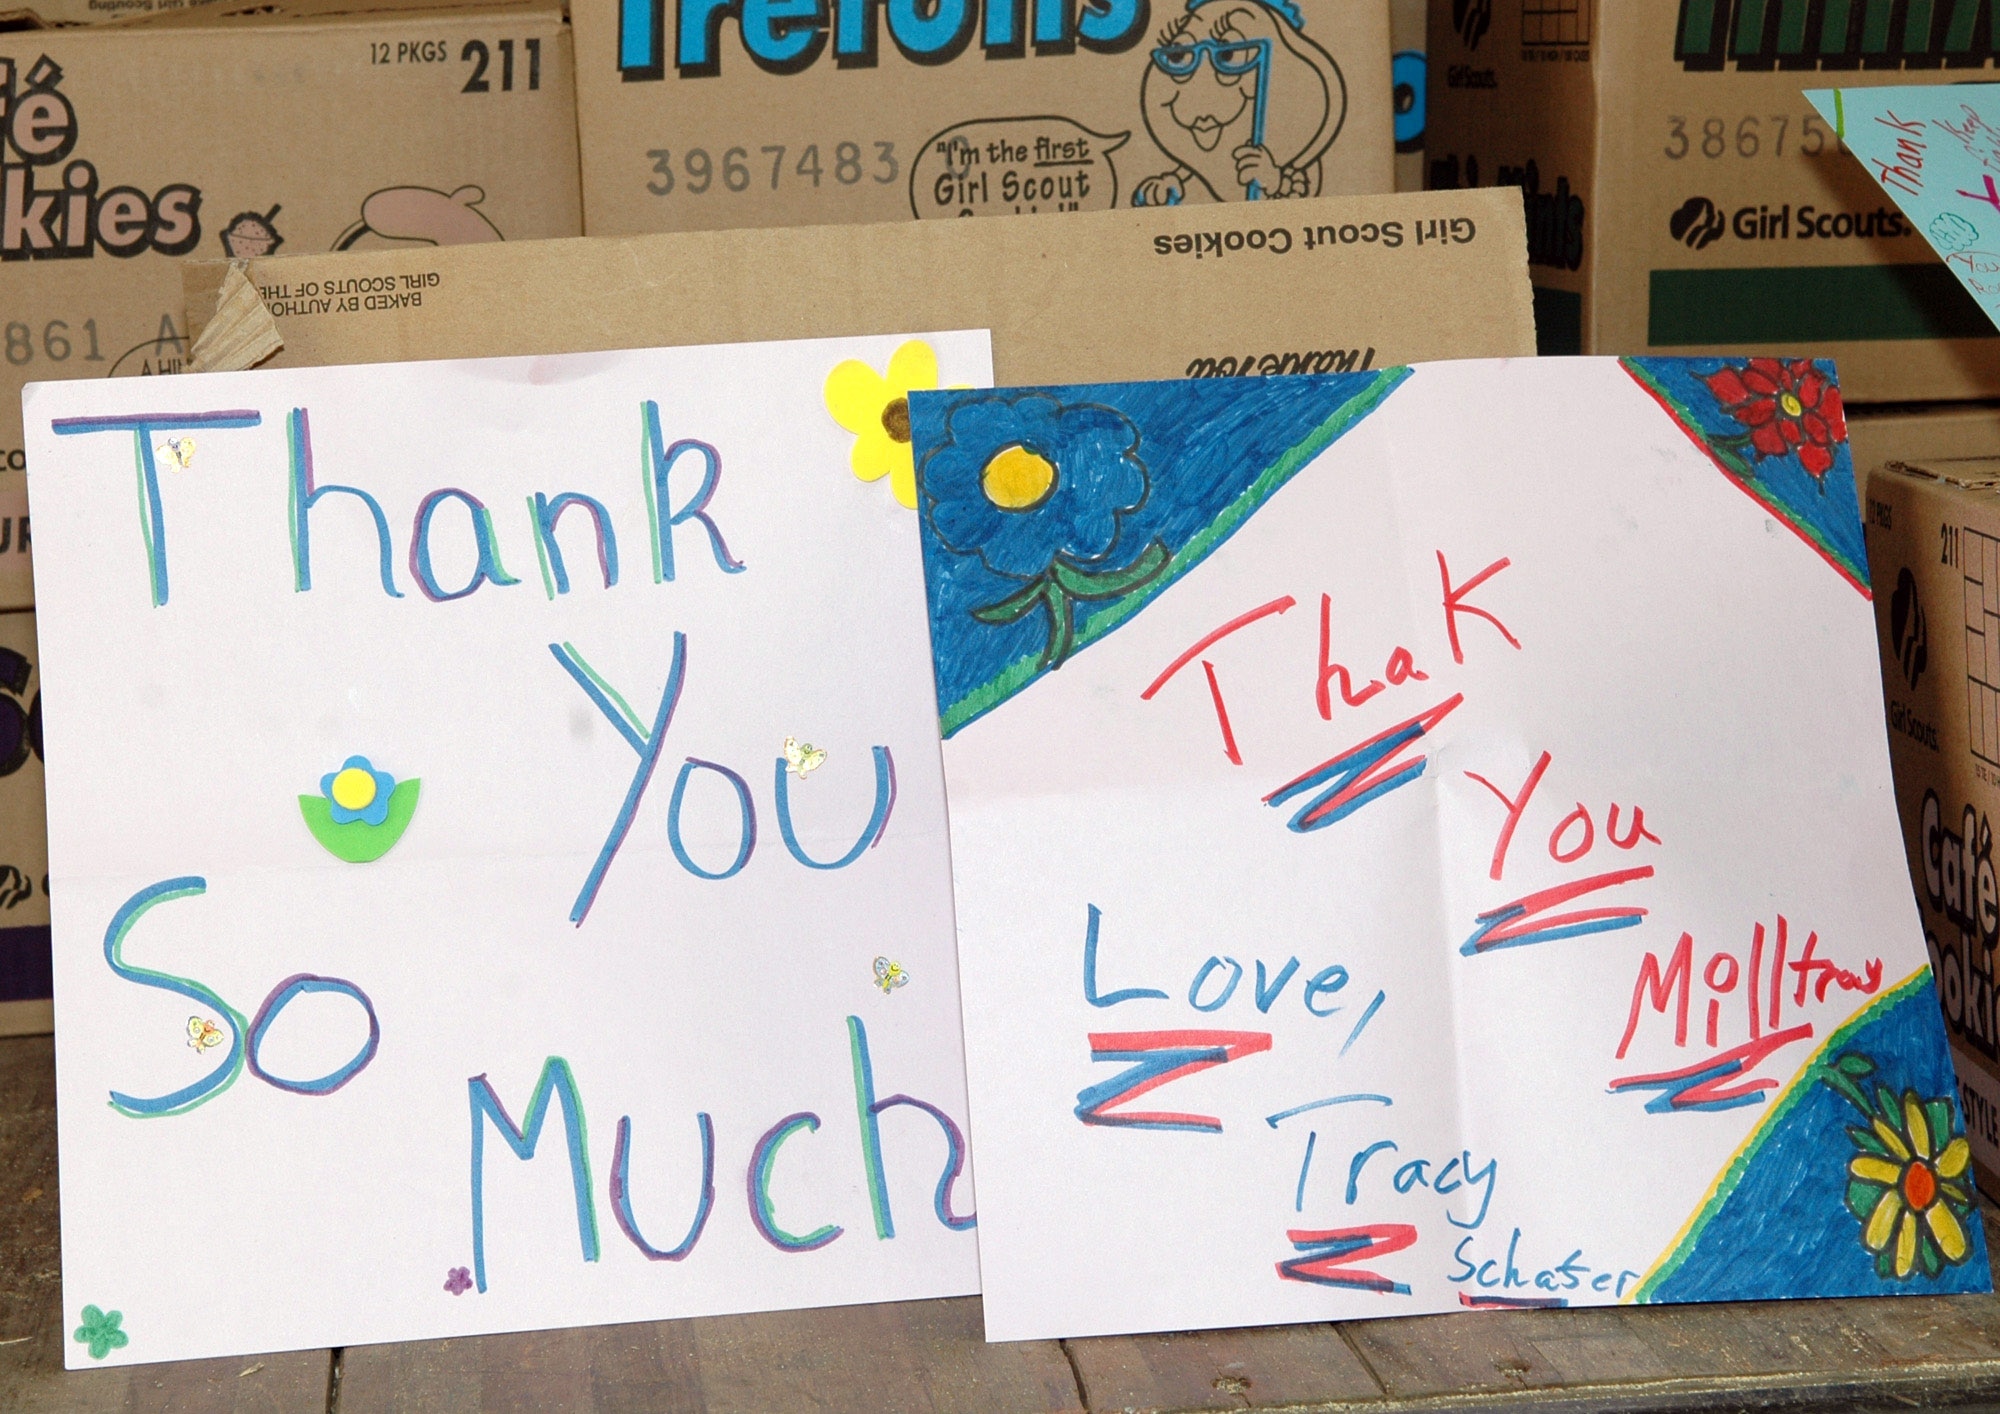 The Girl Scouts with the Inland Empire Council collected more than 9,600 boxes of cookies through Operation Troop to Troop and sent thank you letters April 23 from the Girl Scout Troop 333 near Spokane, Wash. The cookies, along with posters and letters, will be sent to deployed servicemembers to thank them for serving. (U.S. Air Force photo/Staff Sgt. Larry Carpenter)